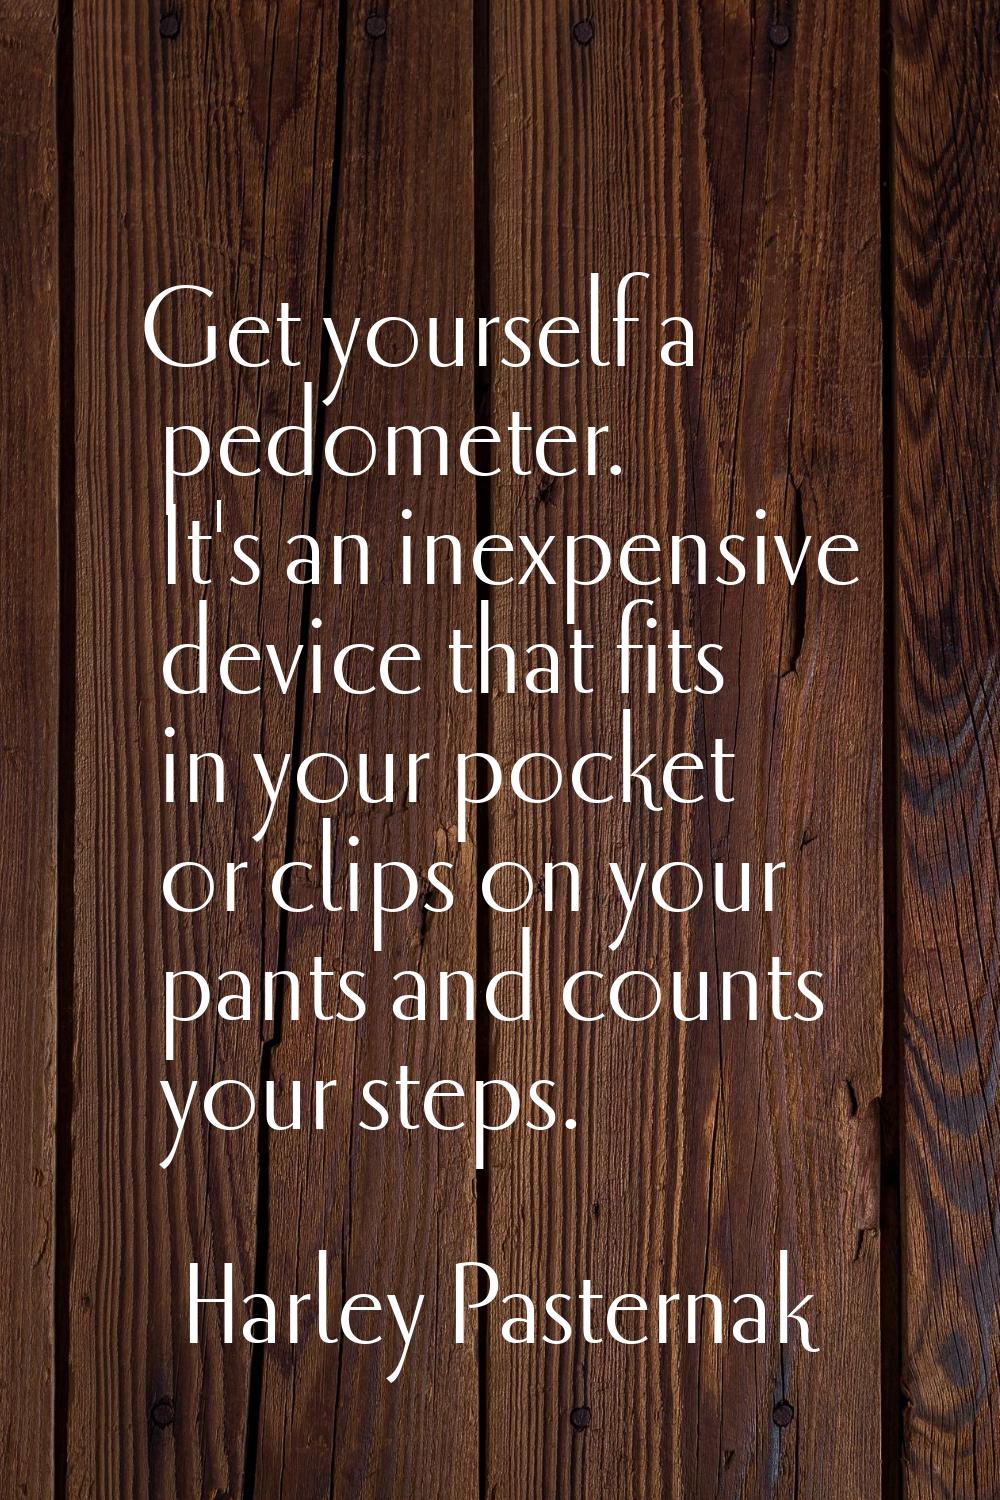 Get yourself a pedometer. It's an inexpensive device that fits in your pocket or clips on your pant